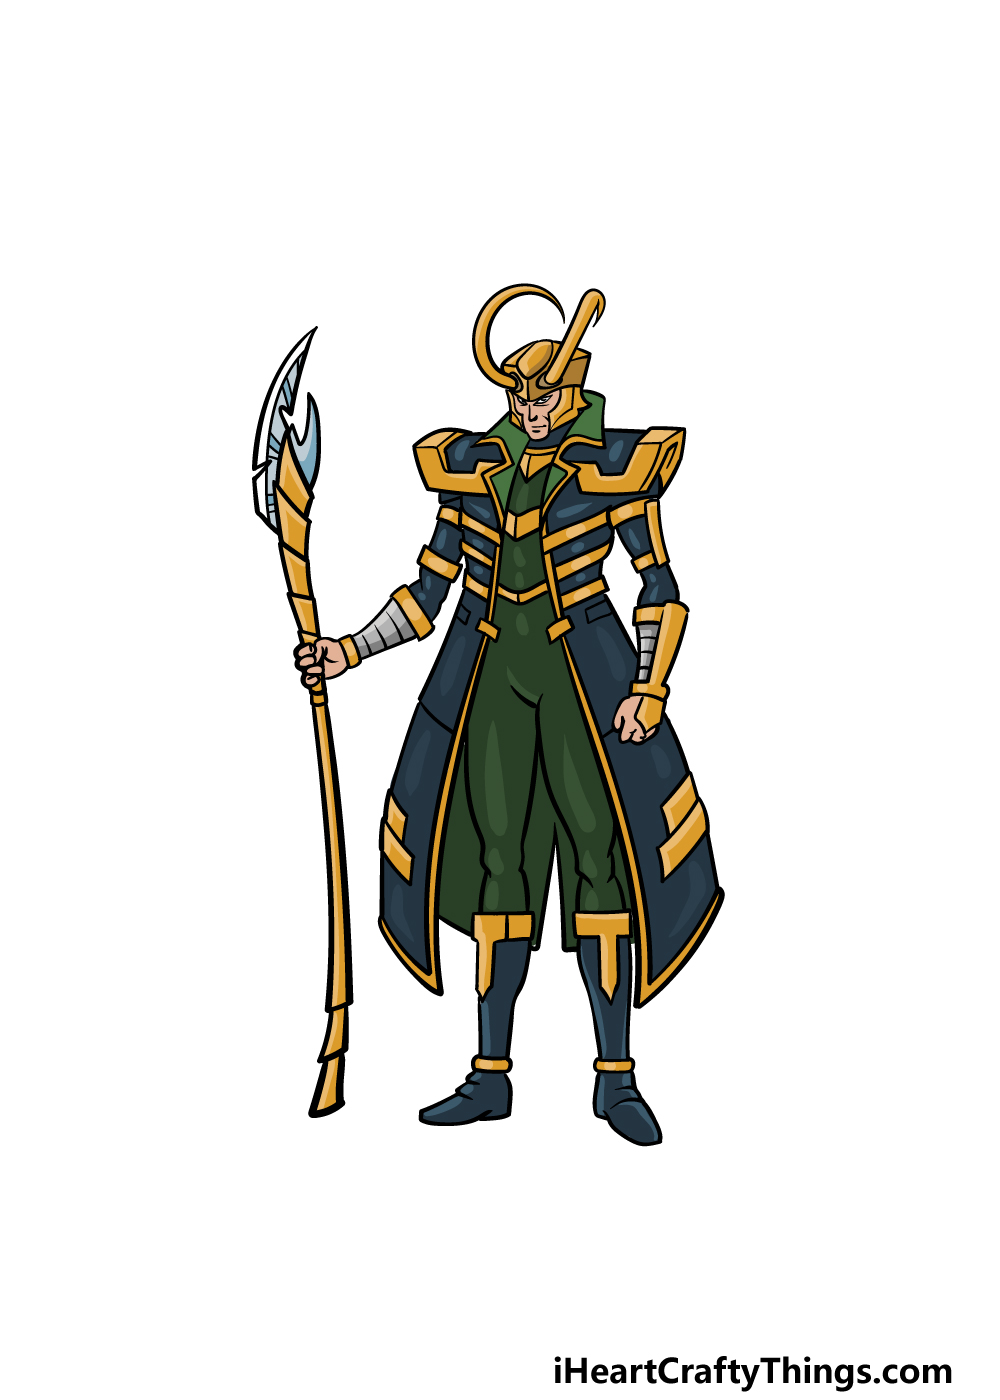 Loki Character Sketch: Marvel Cinematic Universe - THE MOVIE CULTURE